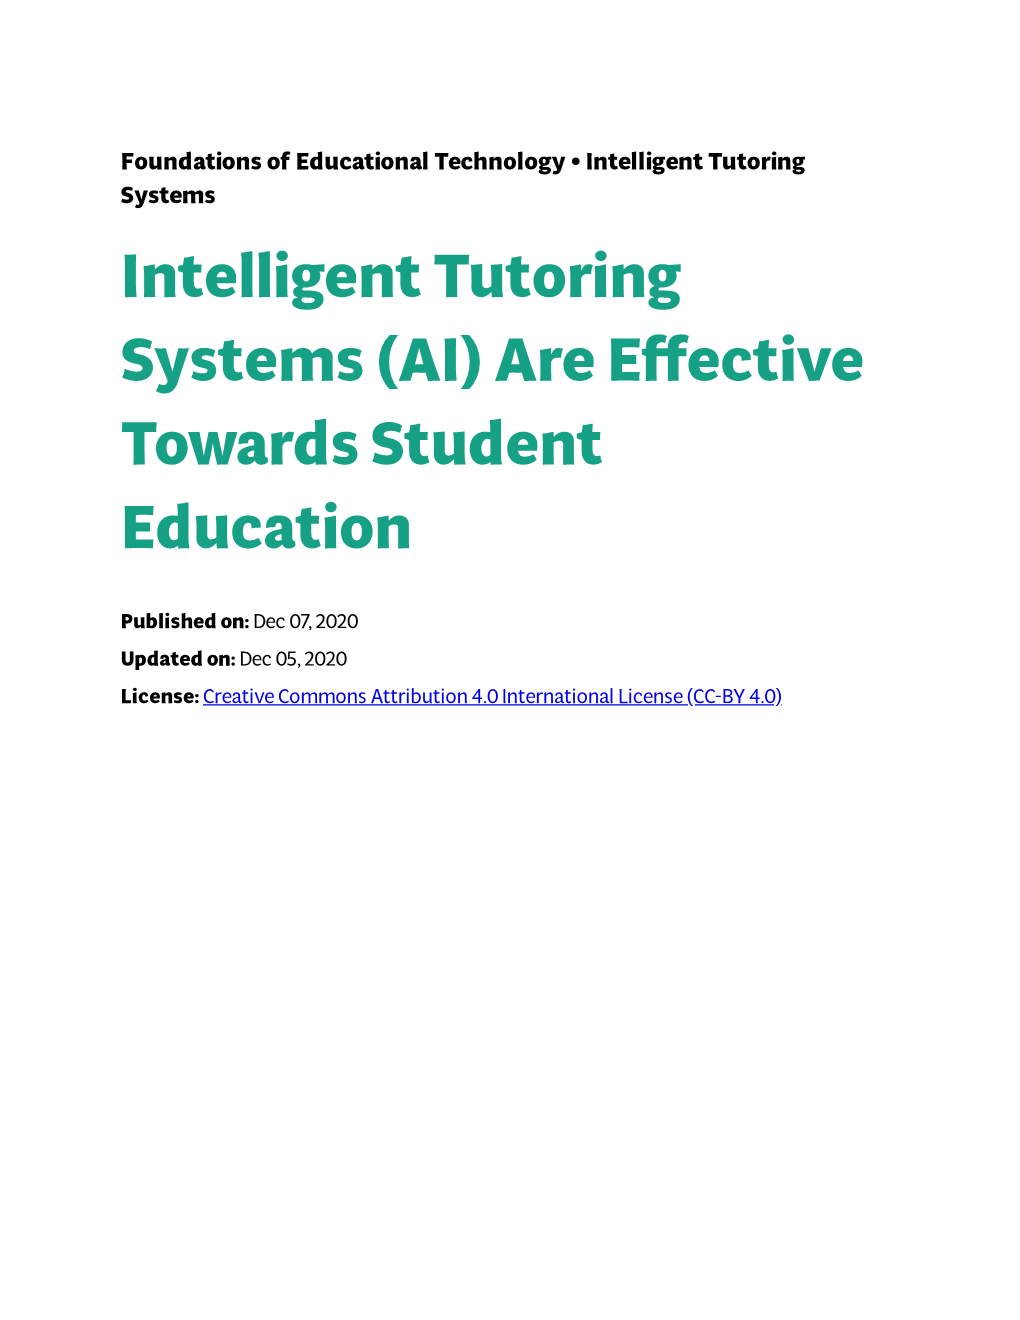 Intelligent Tutoring Systems (AI) Are Effective Towards Student Education